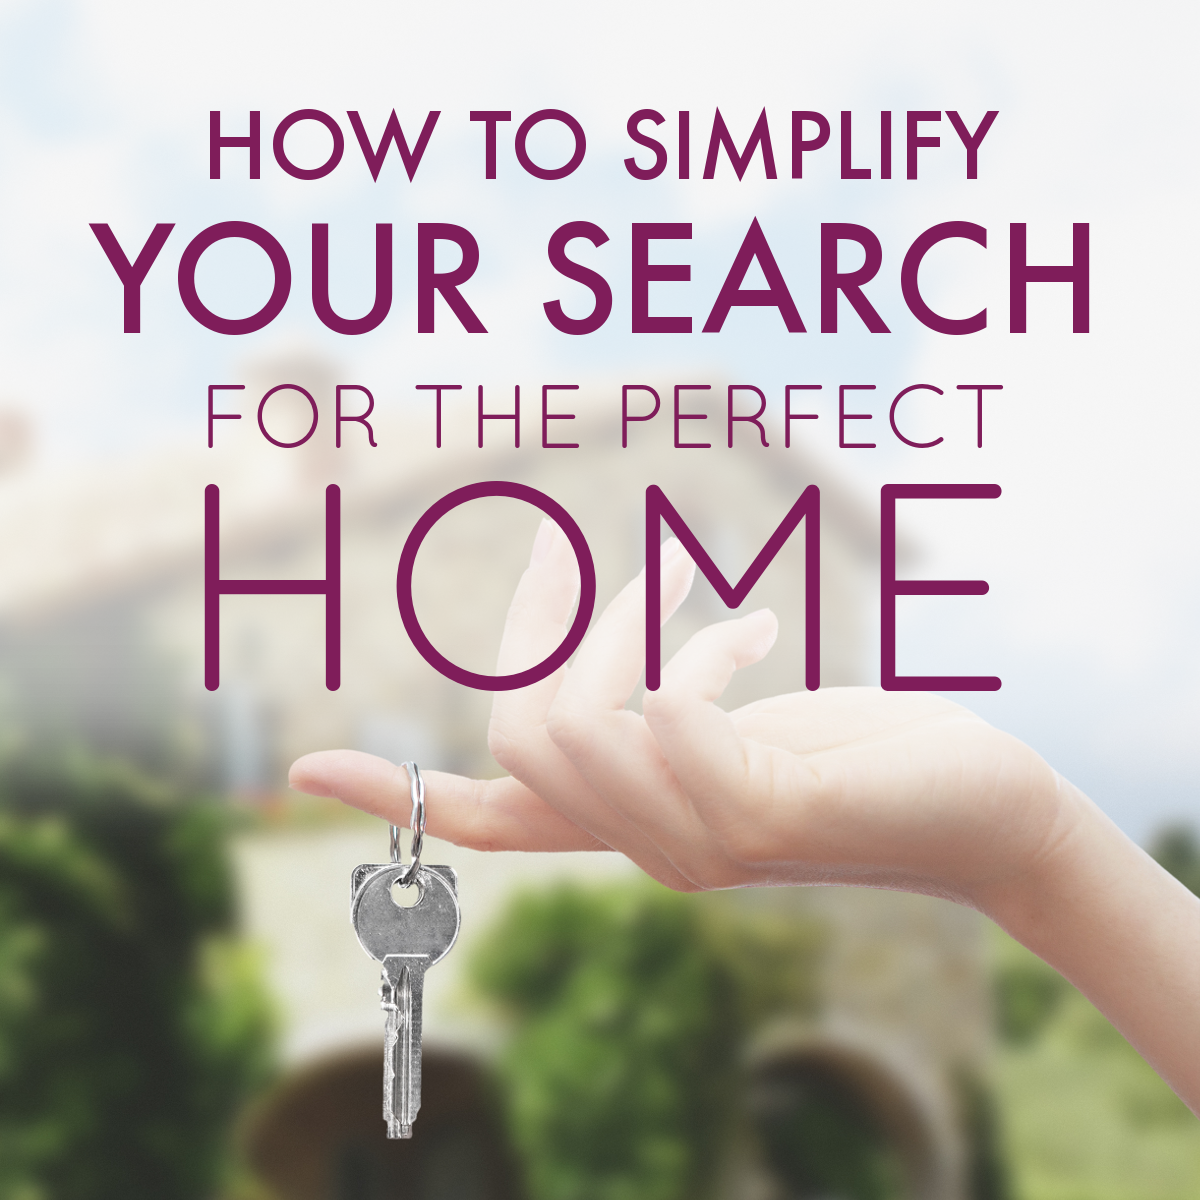 How to Simplify Your Search for the Perfect Home